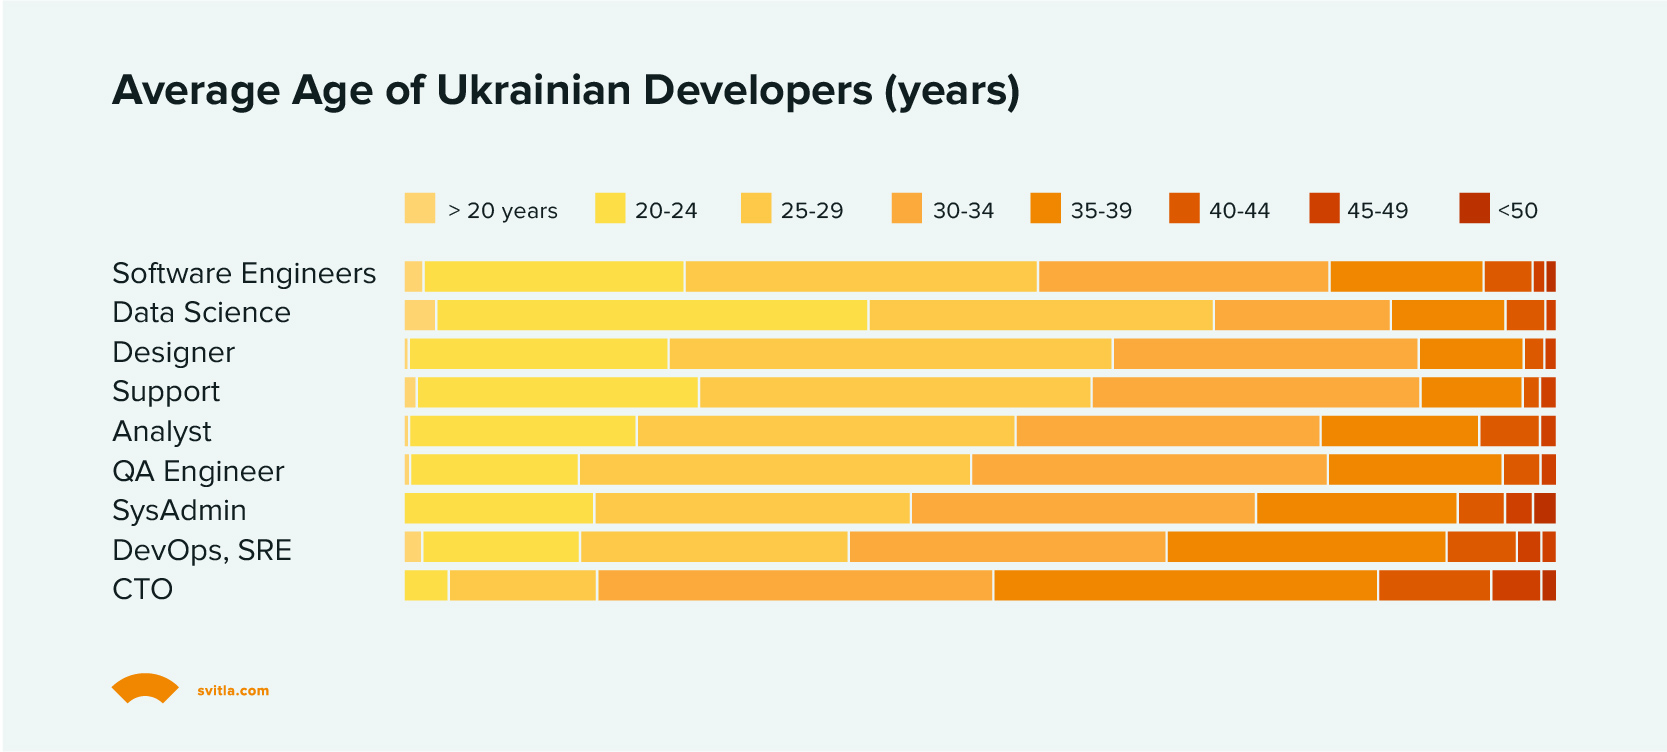 Average Age of Developers in Years